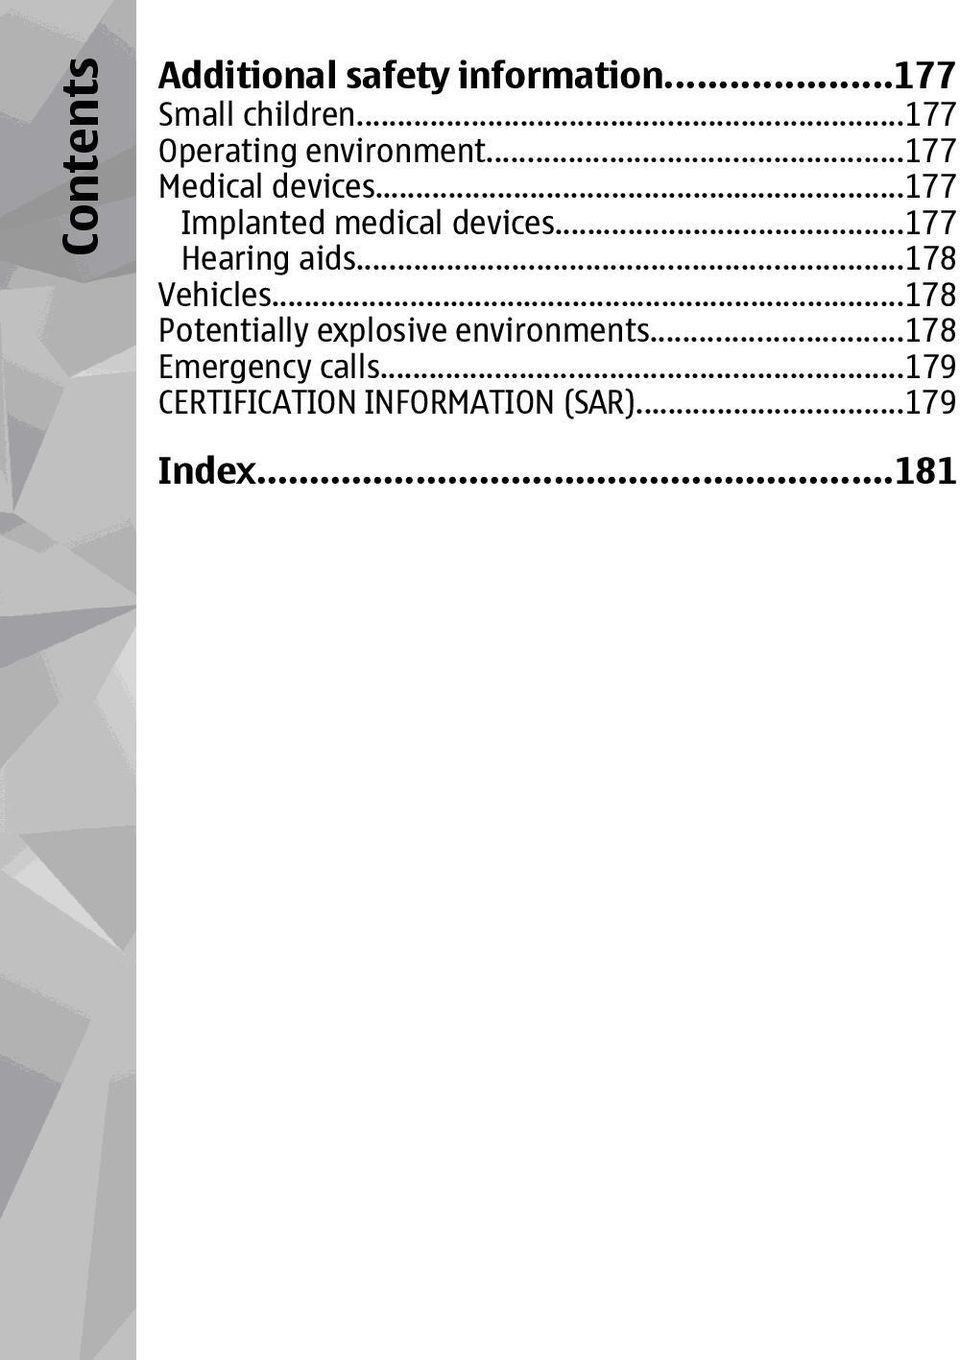 ..177 Implanted medical devices...177 Hearing aids...178 Vehicles.